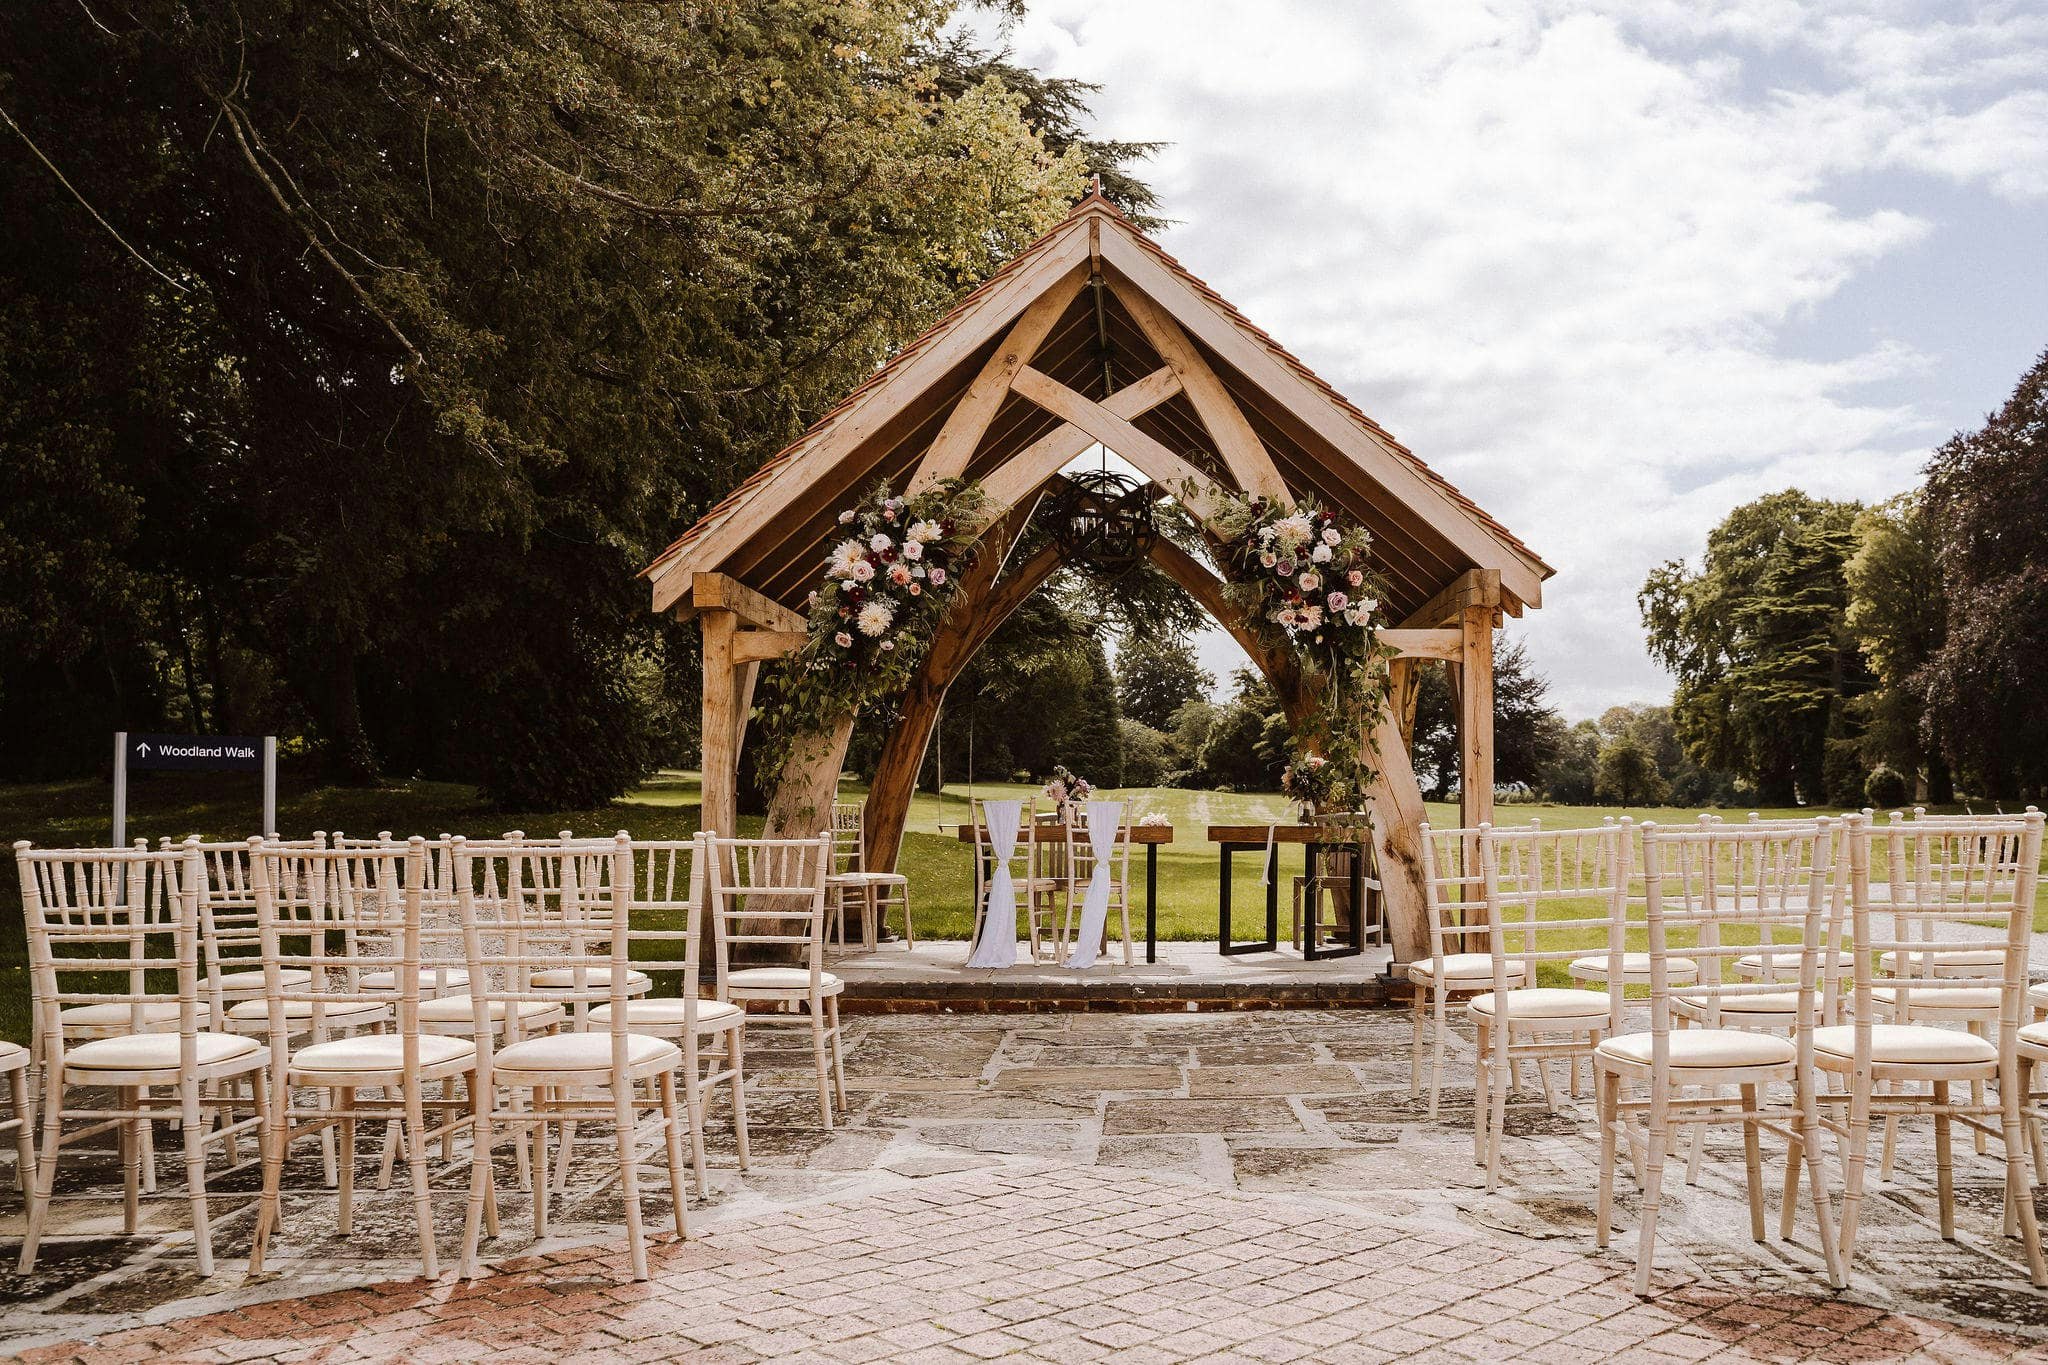 A wooden gazebo in the grounds of the hotel with chairs laid out.